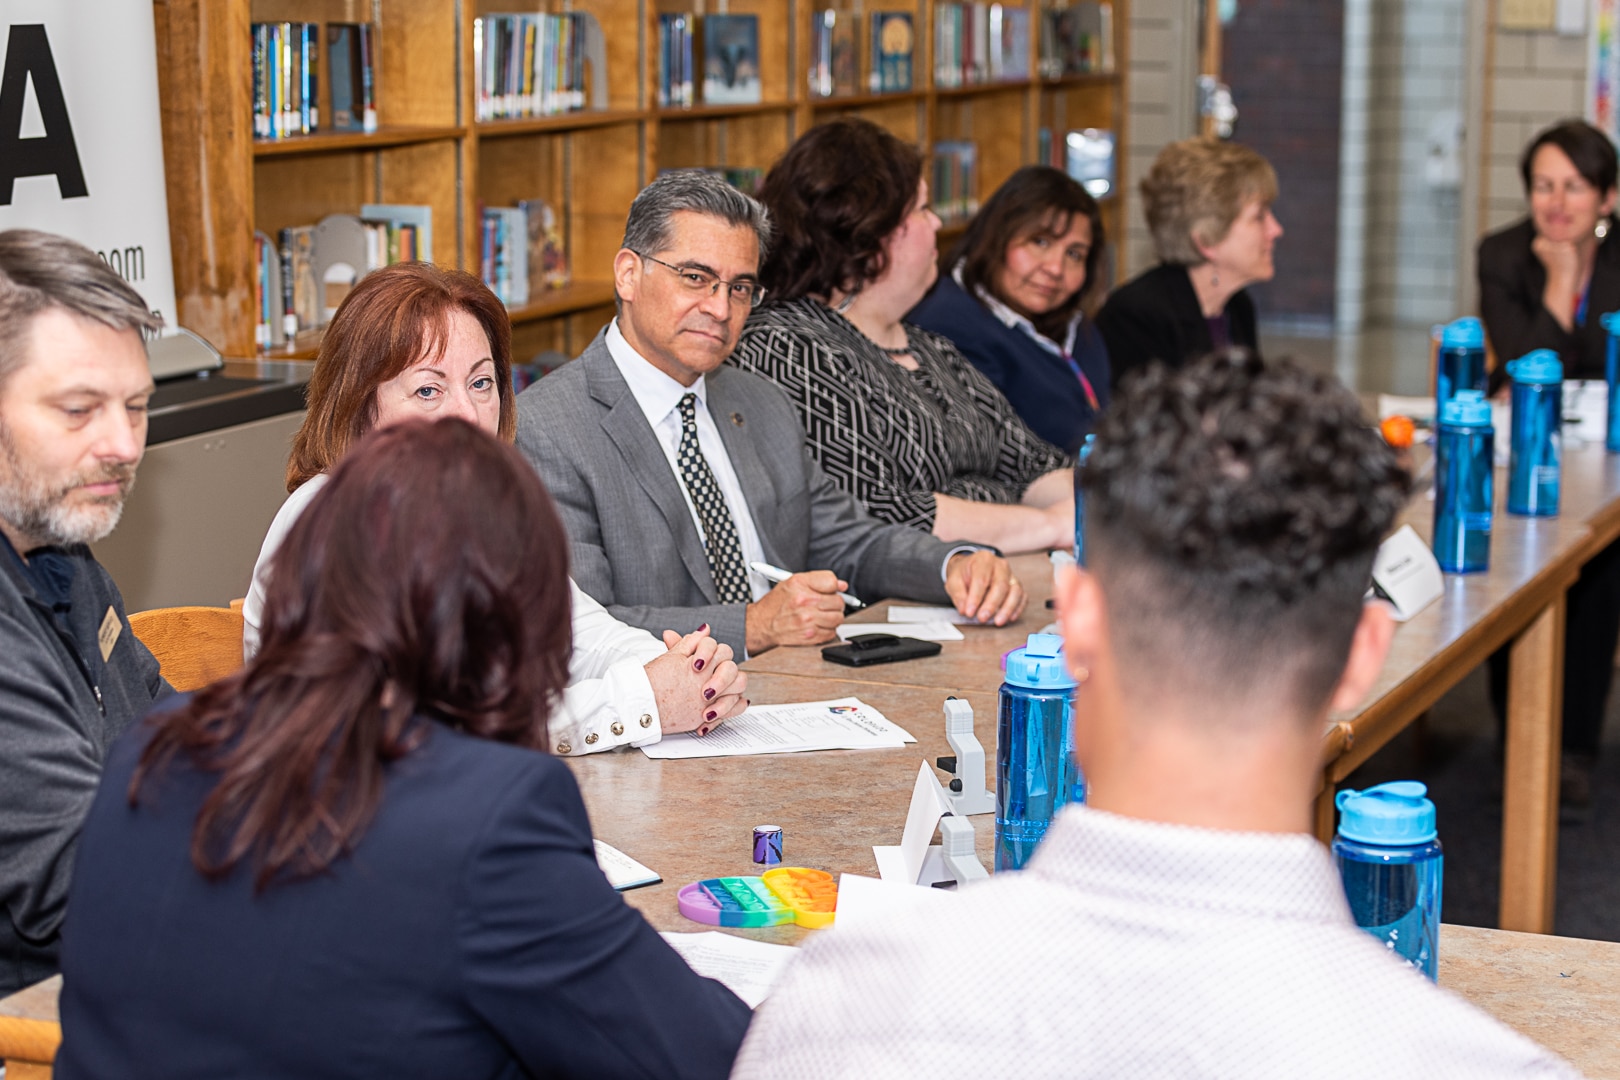 Secretary Becerra attending a roundtable event in school library